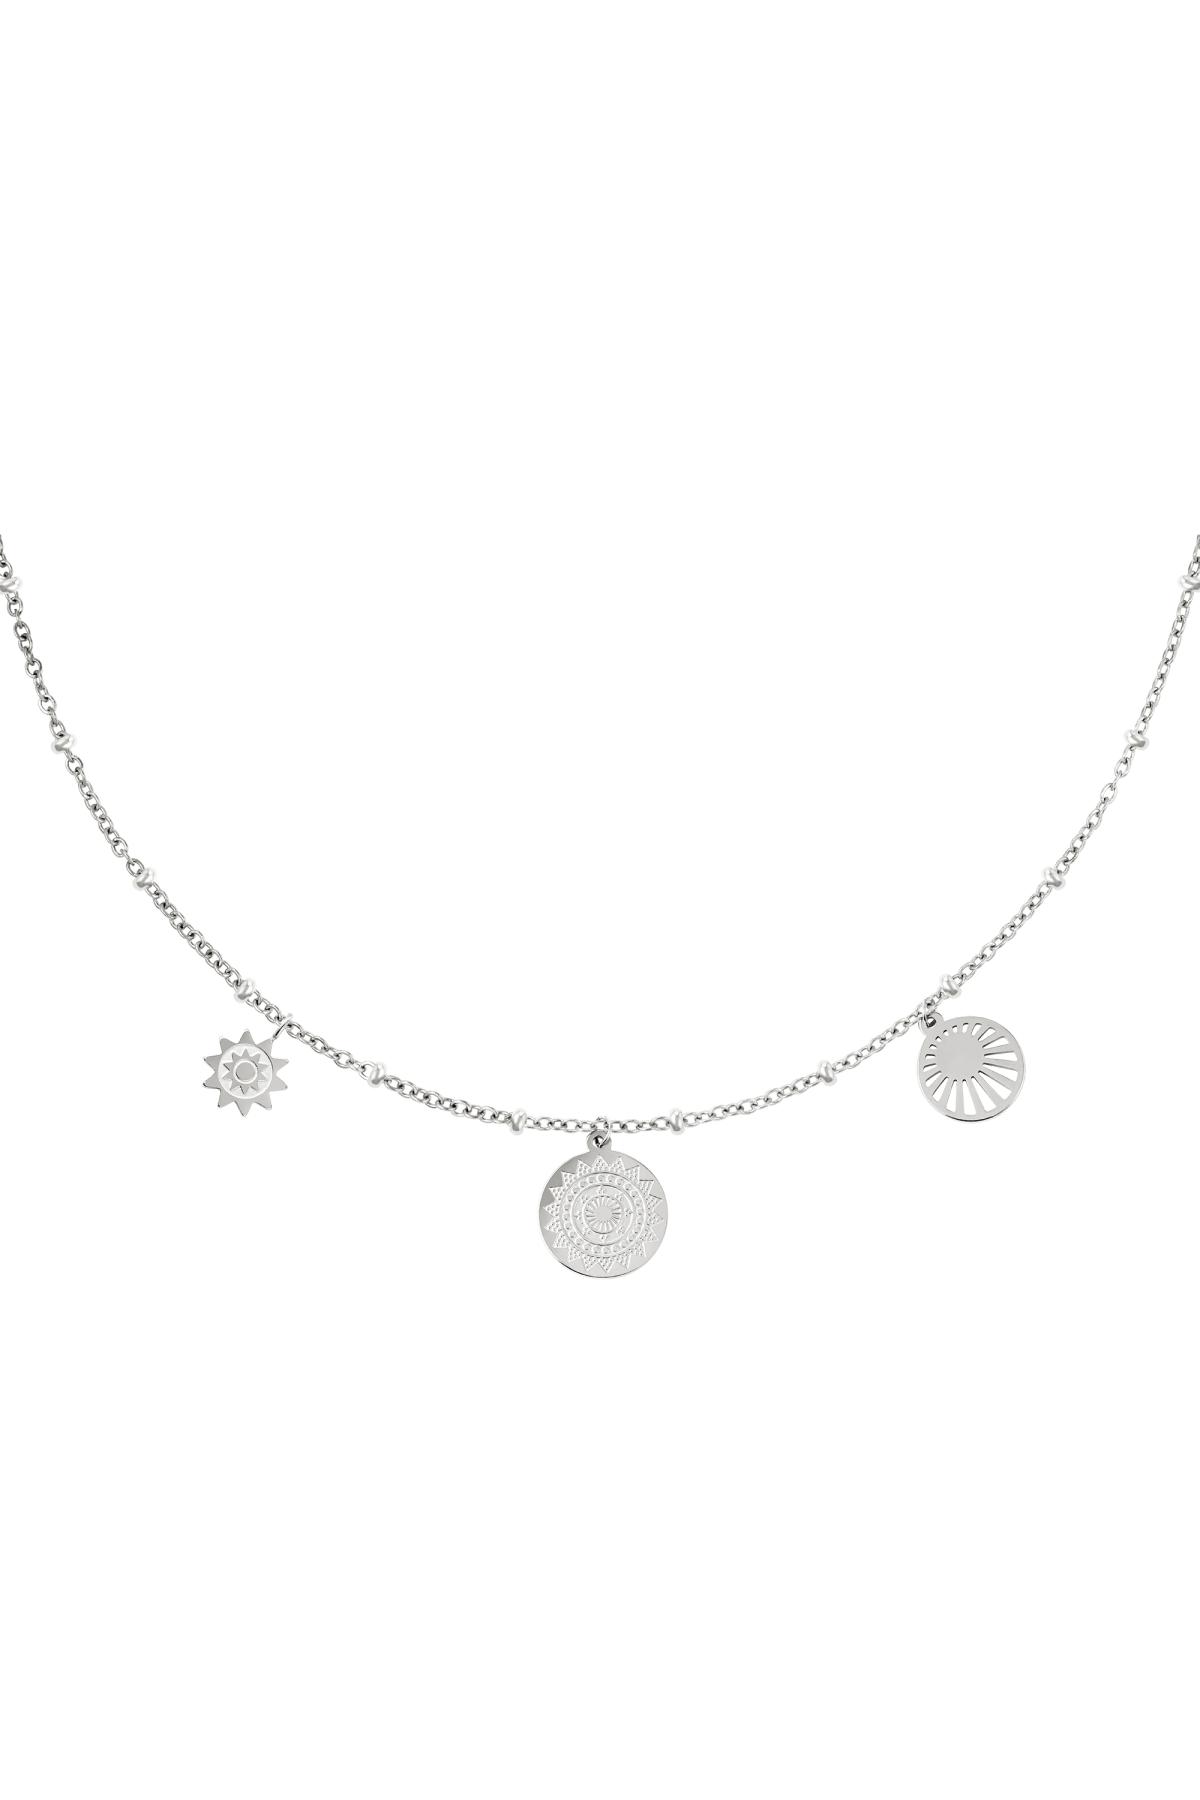 Collana sole Silver Stainless Steel h5 